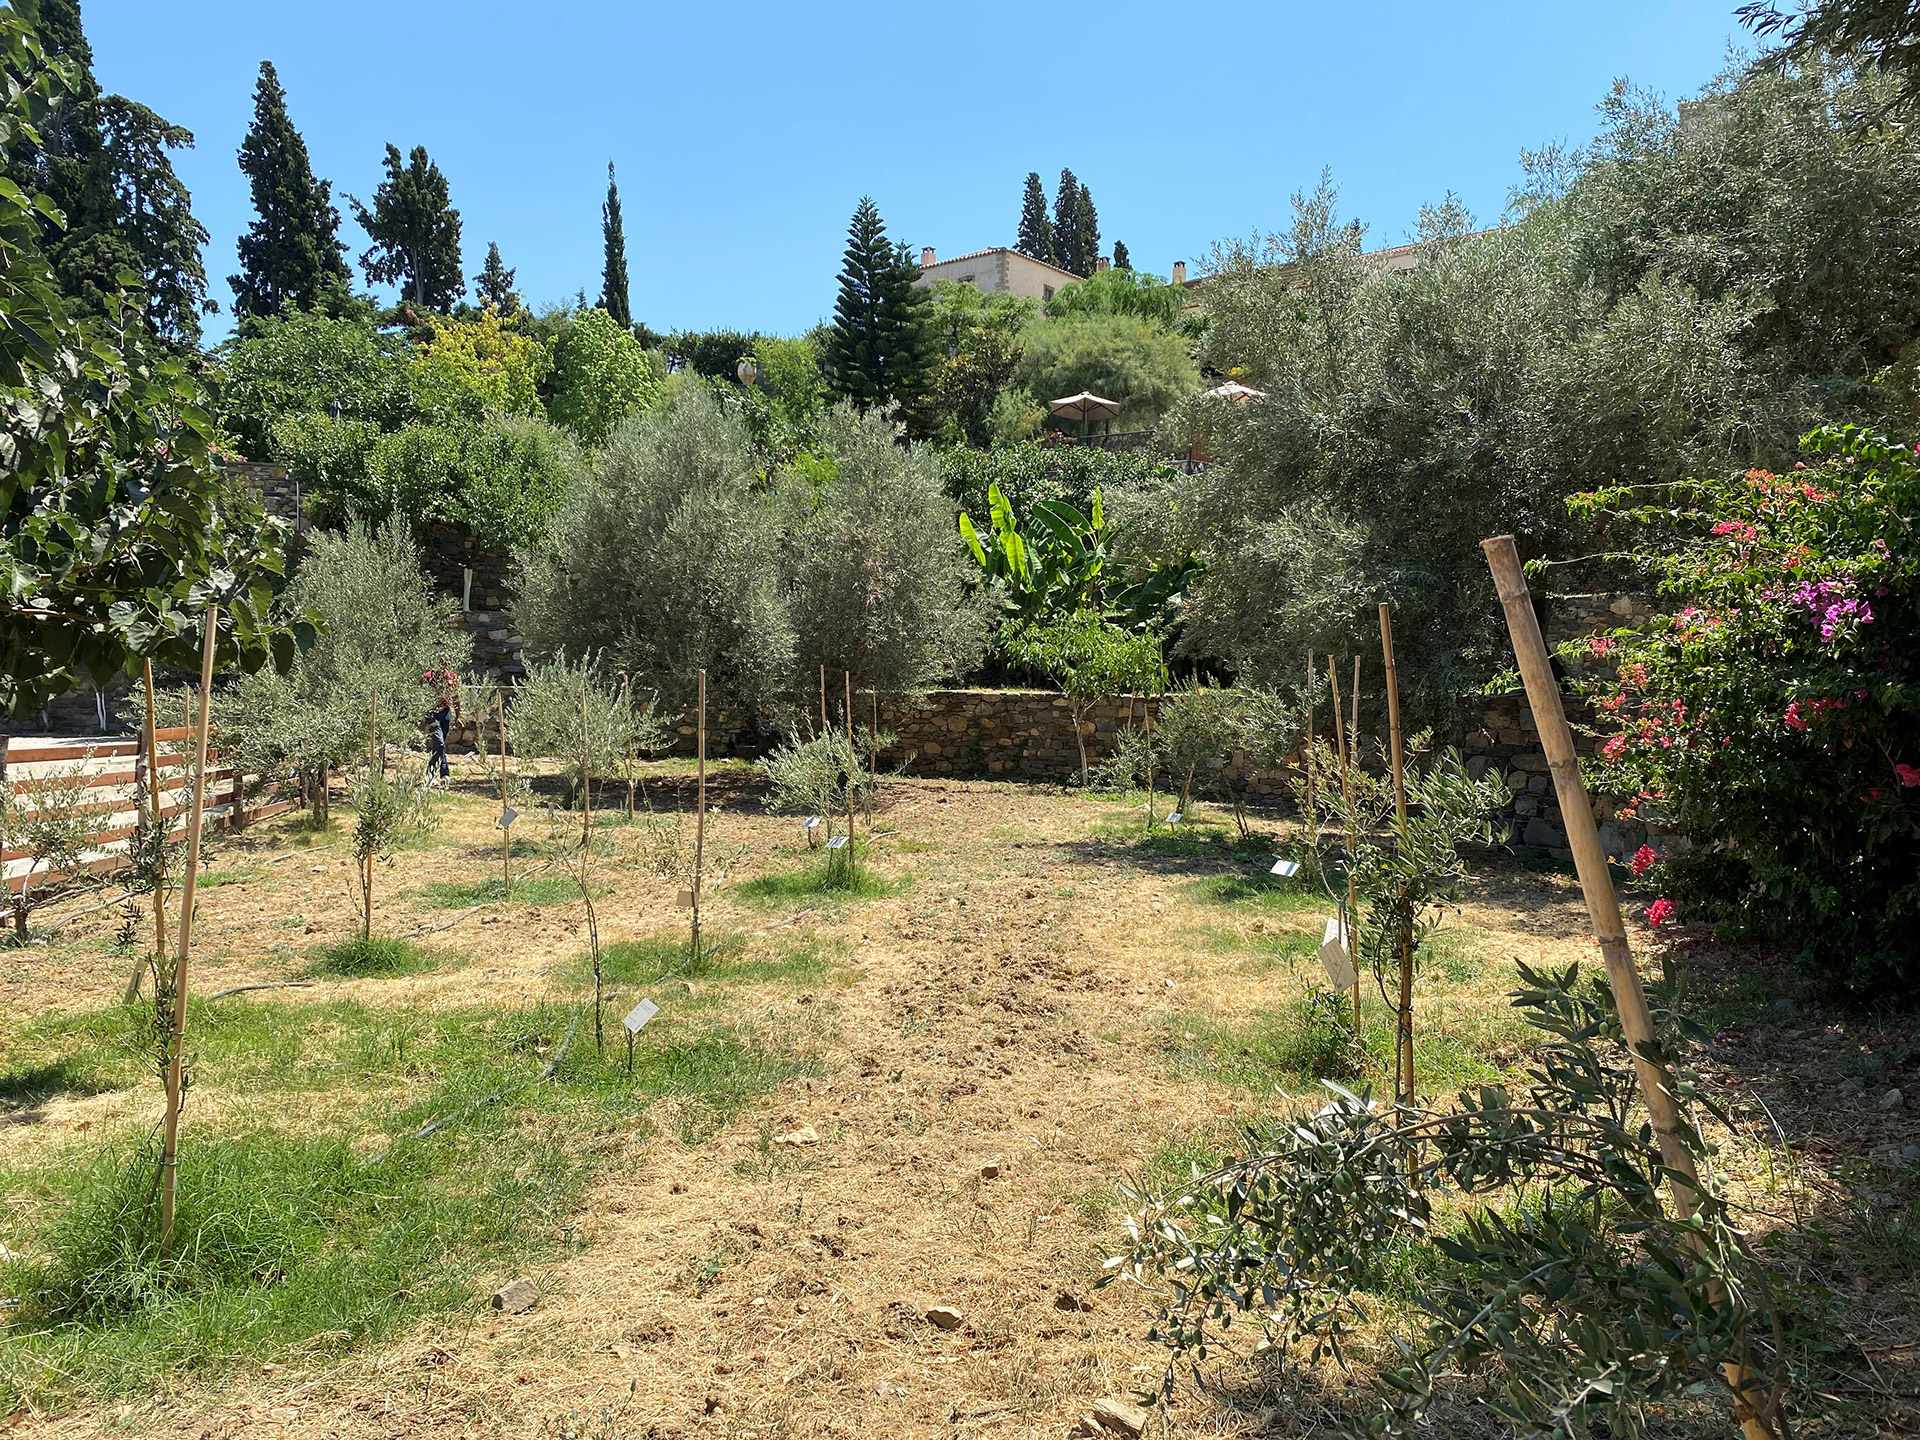 Adopt-an-olive-tree-area